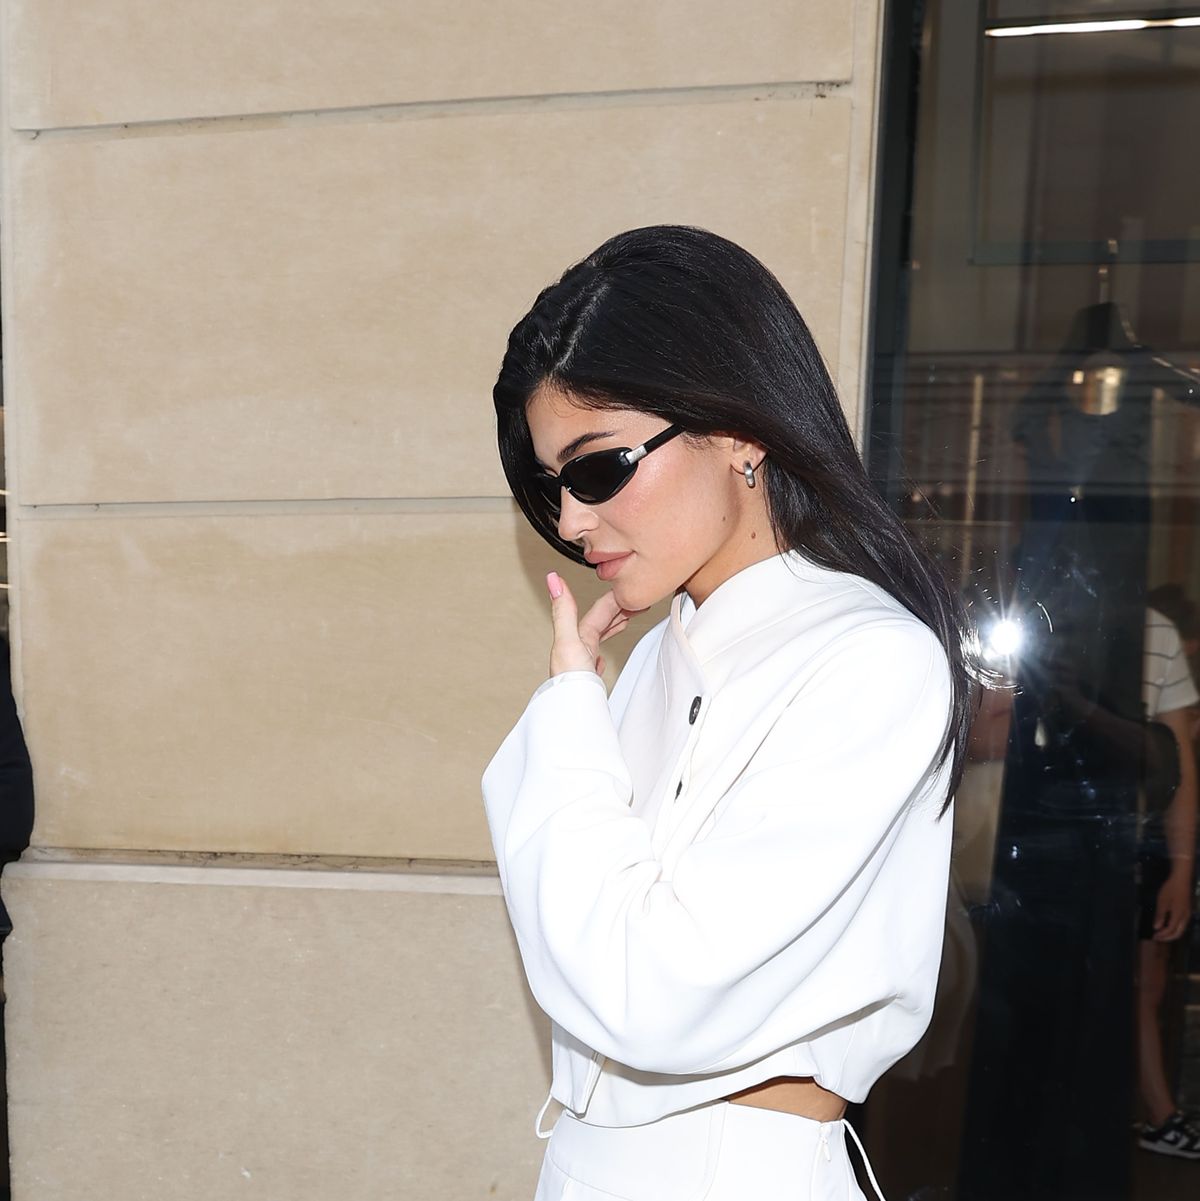 Kylie Jenner Makes Skirt Suit Sexy With White Blazer and Mini Skirt